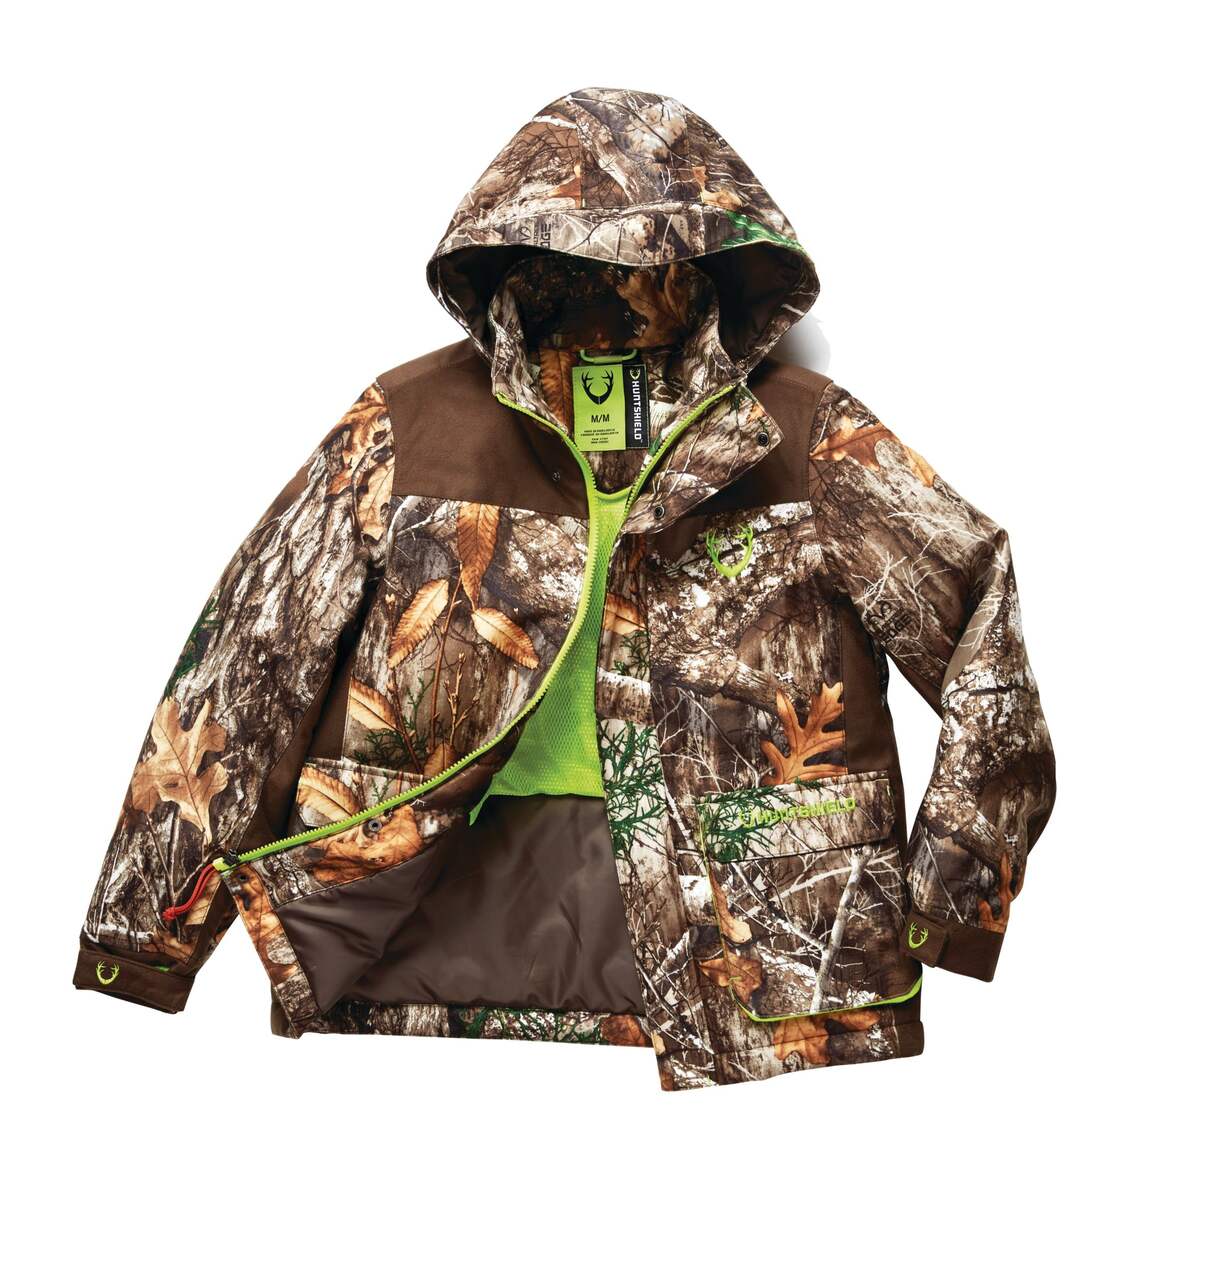 Huntshield Youth Pullover Hoodie with Pockets for Hunting/Hiking, Camo/Green